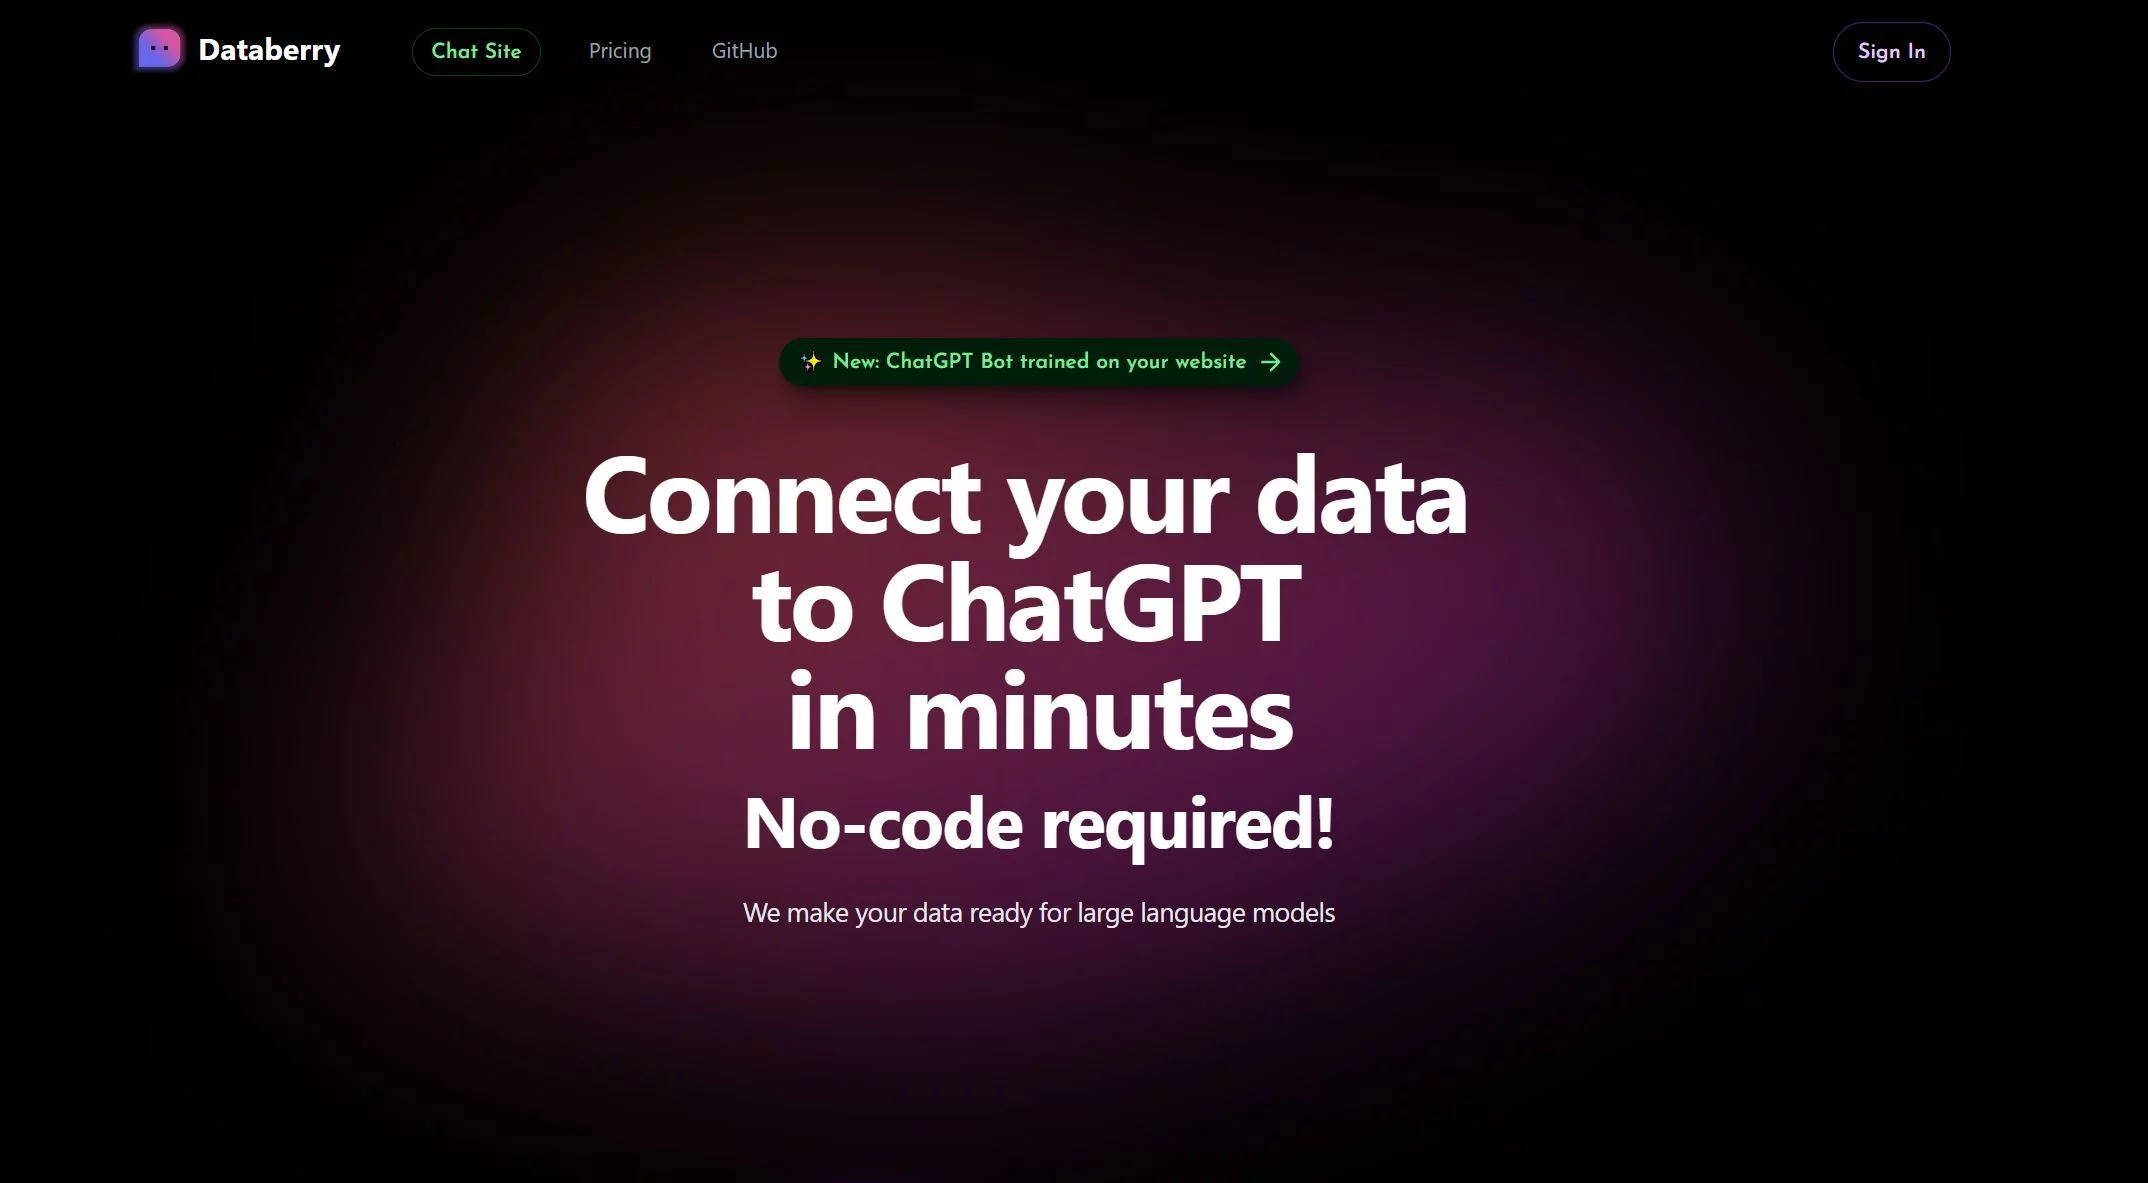  Connect your data to ChatGPT in seconds. There is